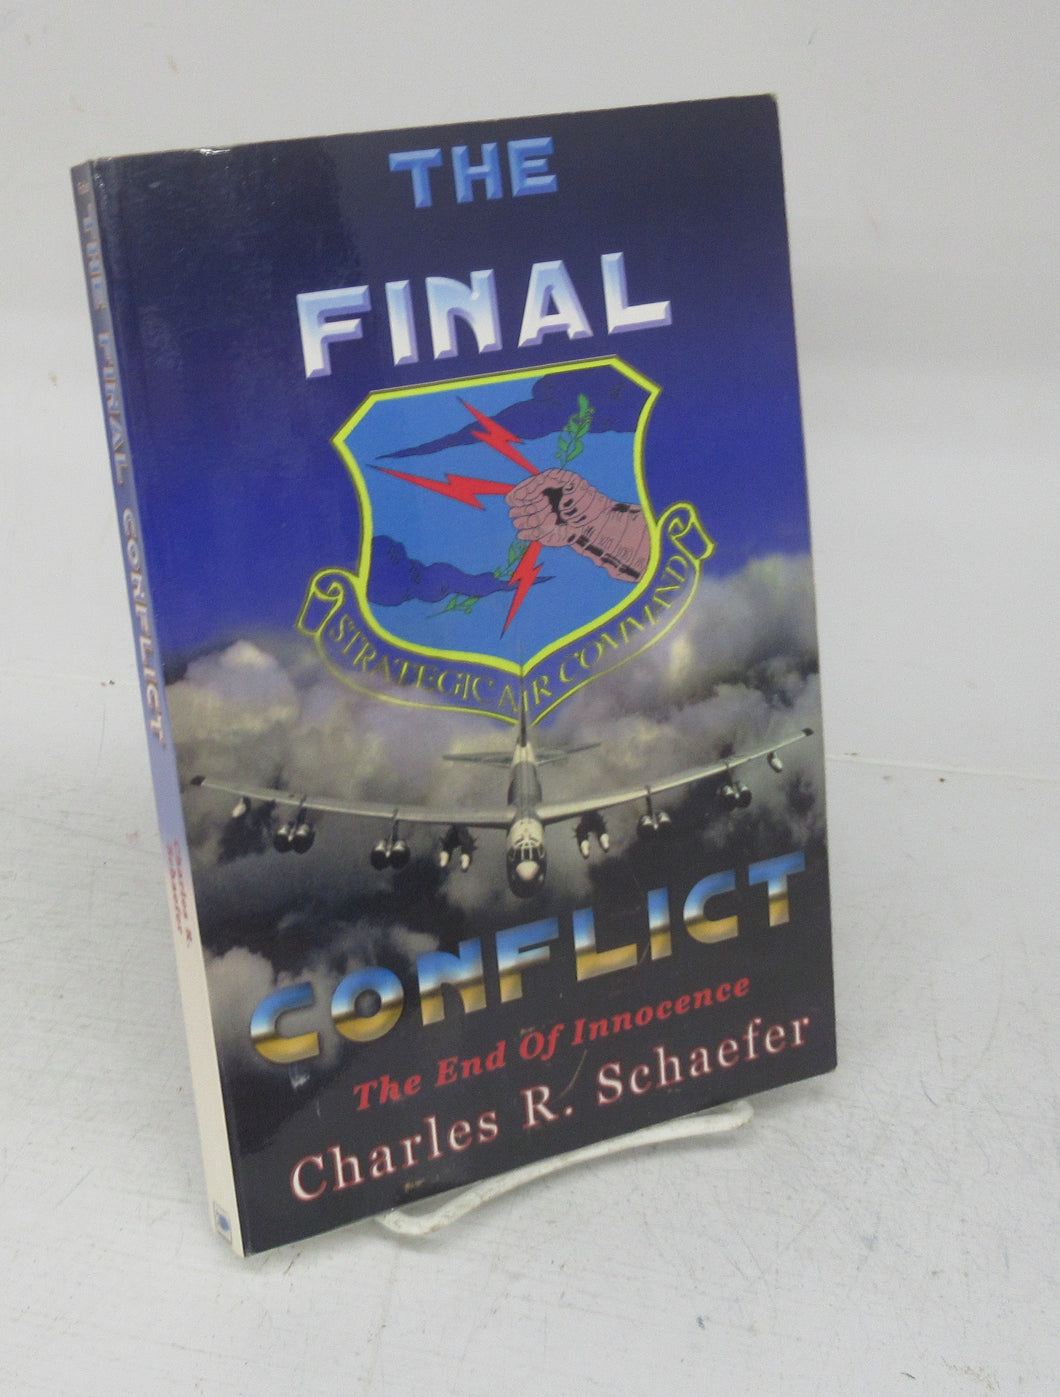 The Final Conflict: The End Of Innocence